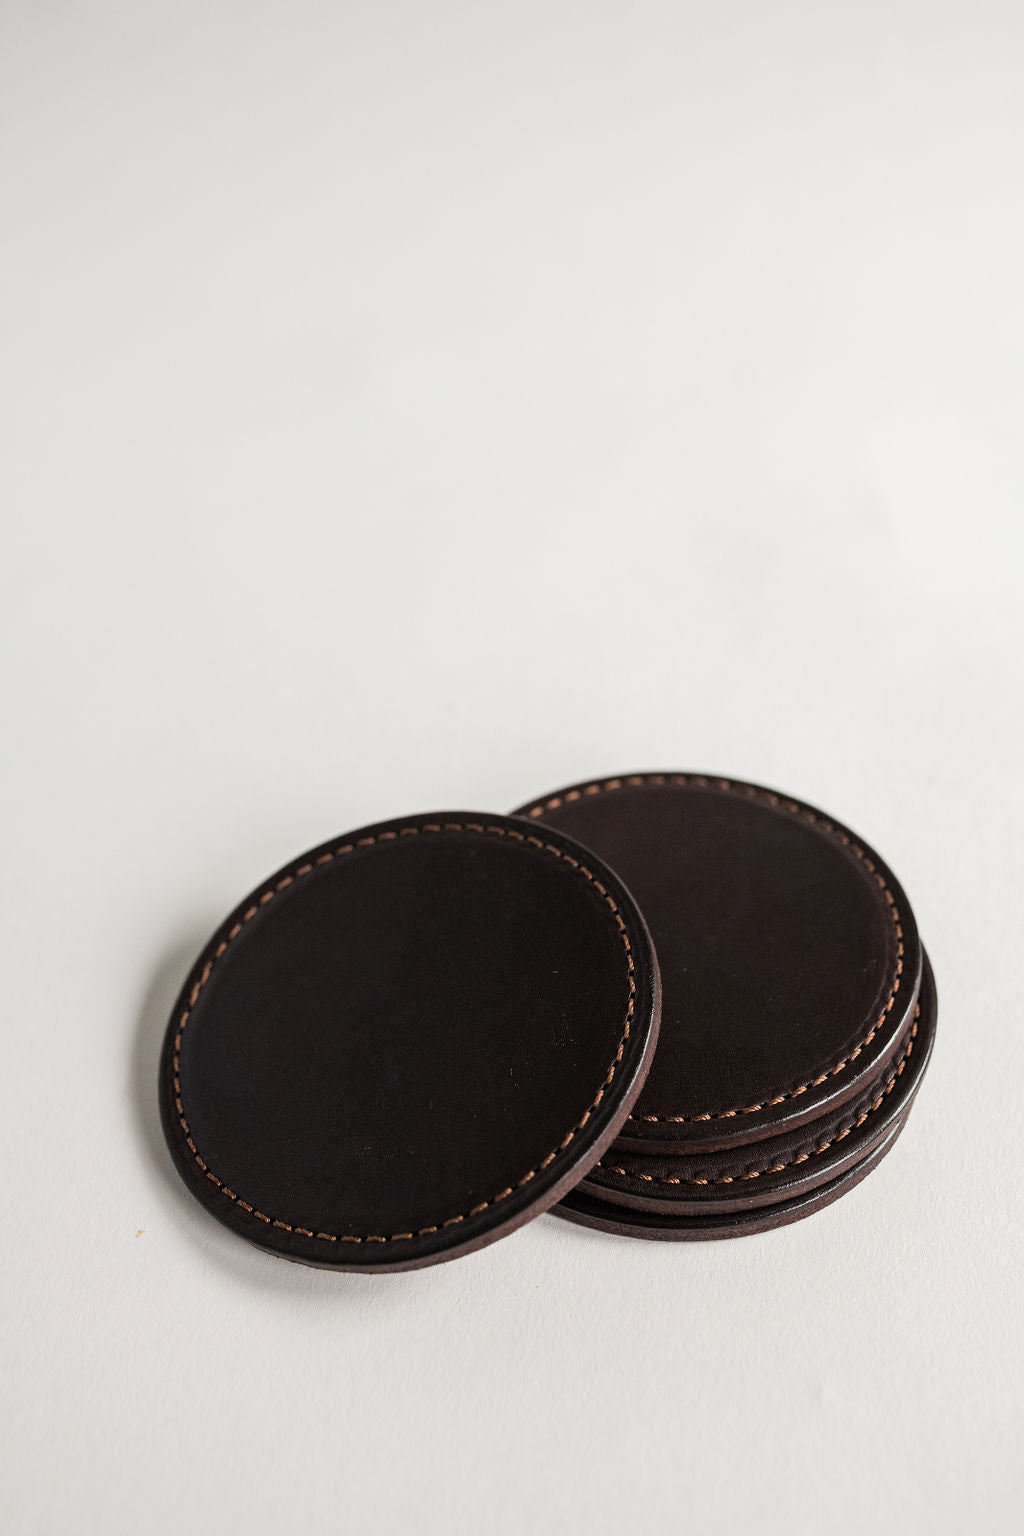 The Leather Coasters - Set of 4